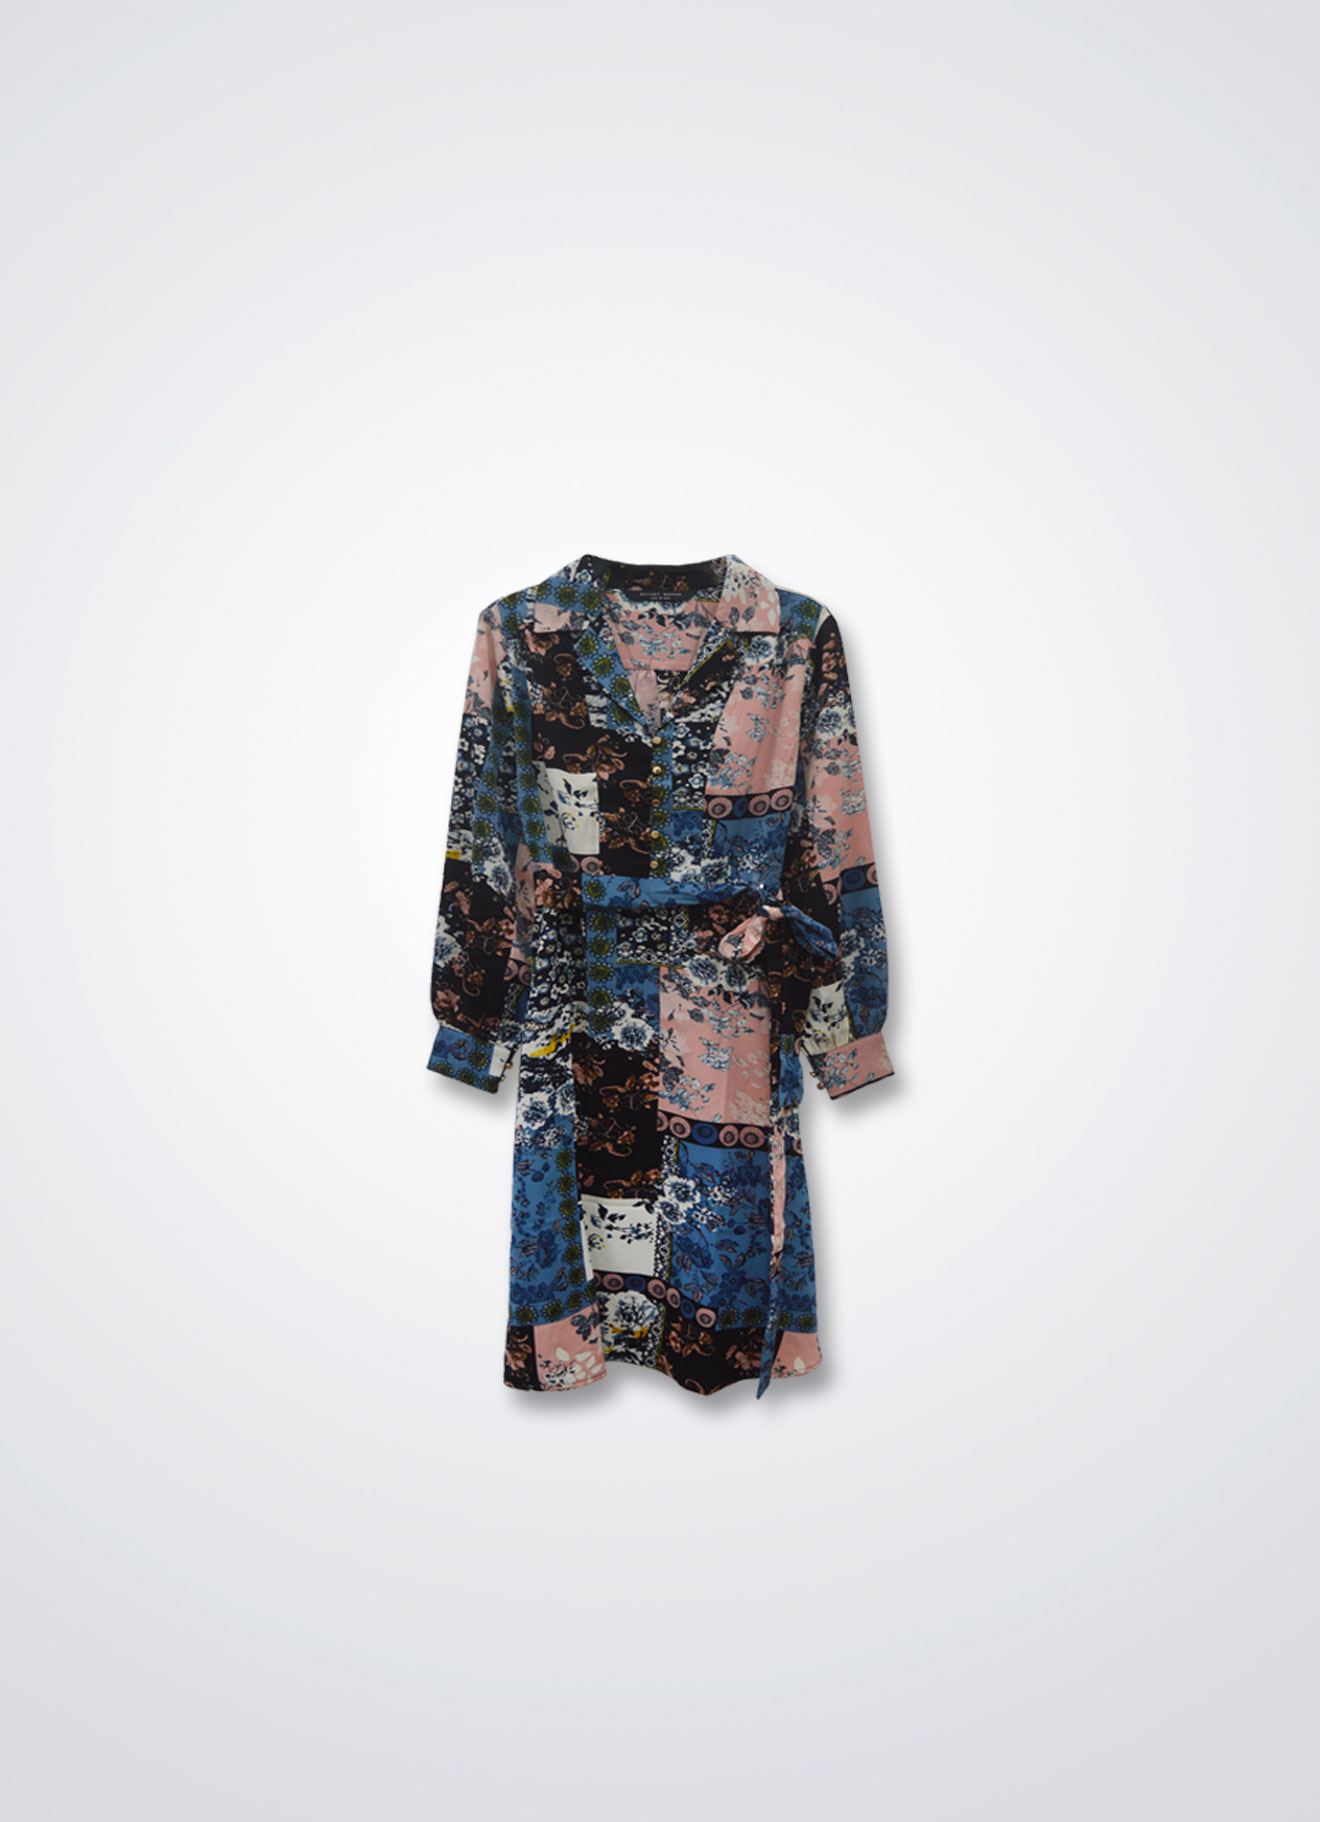 Anthracite by Printed Dress